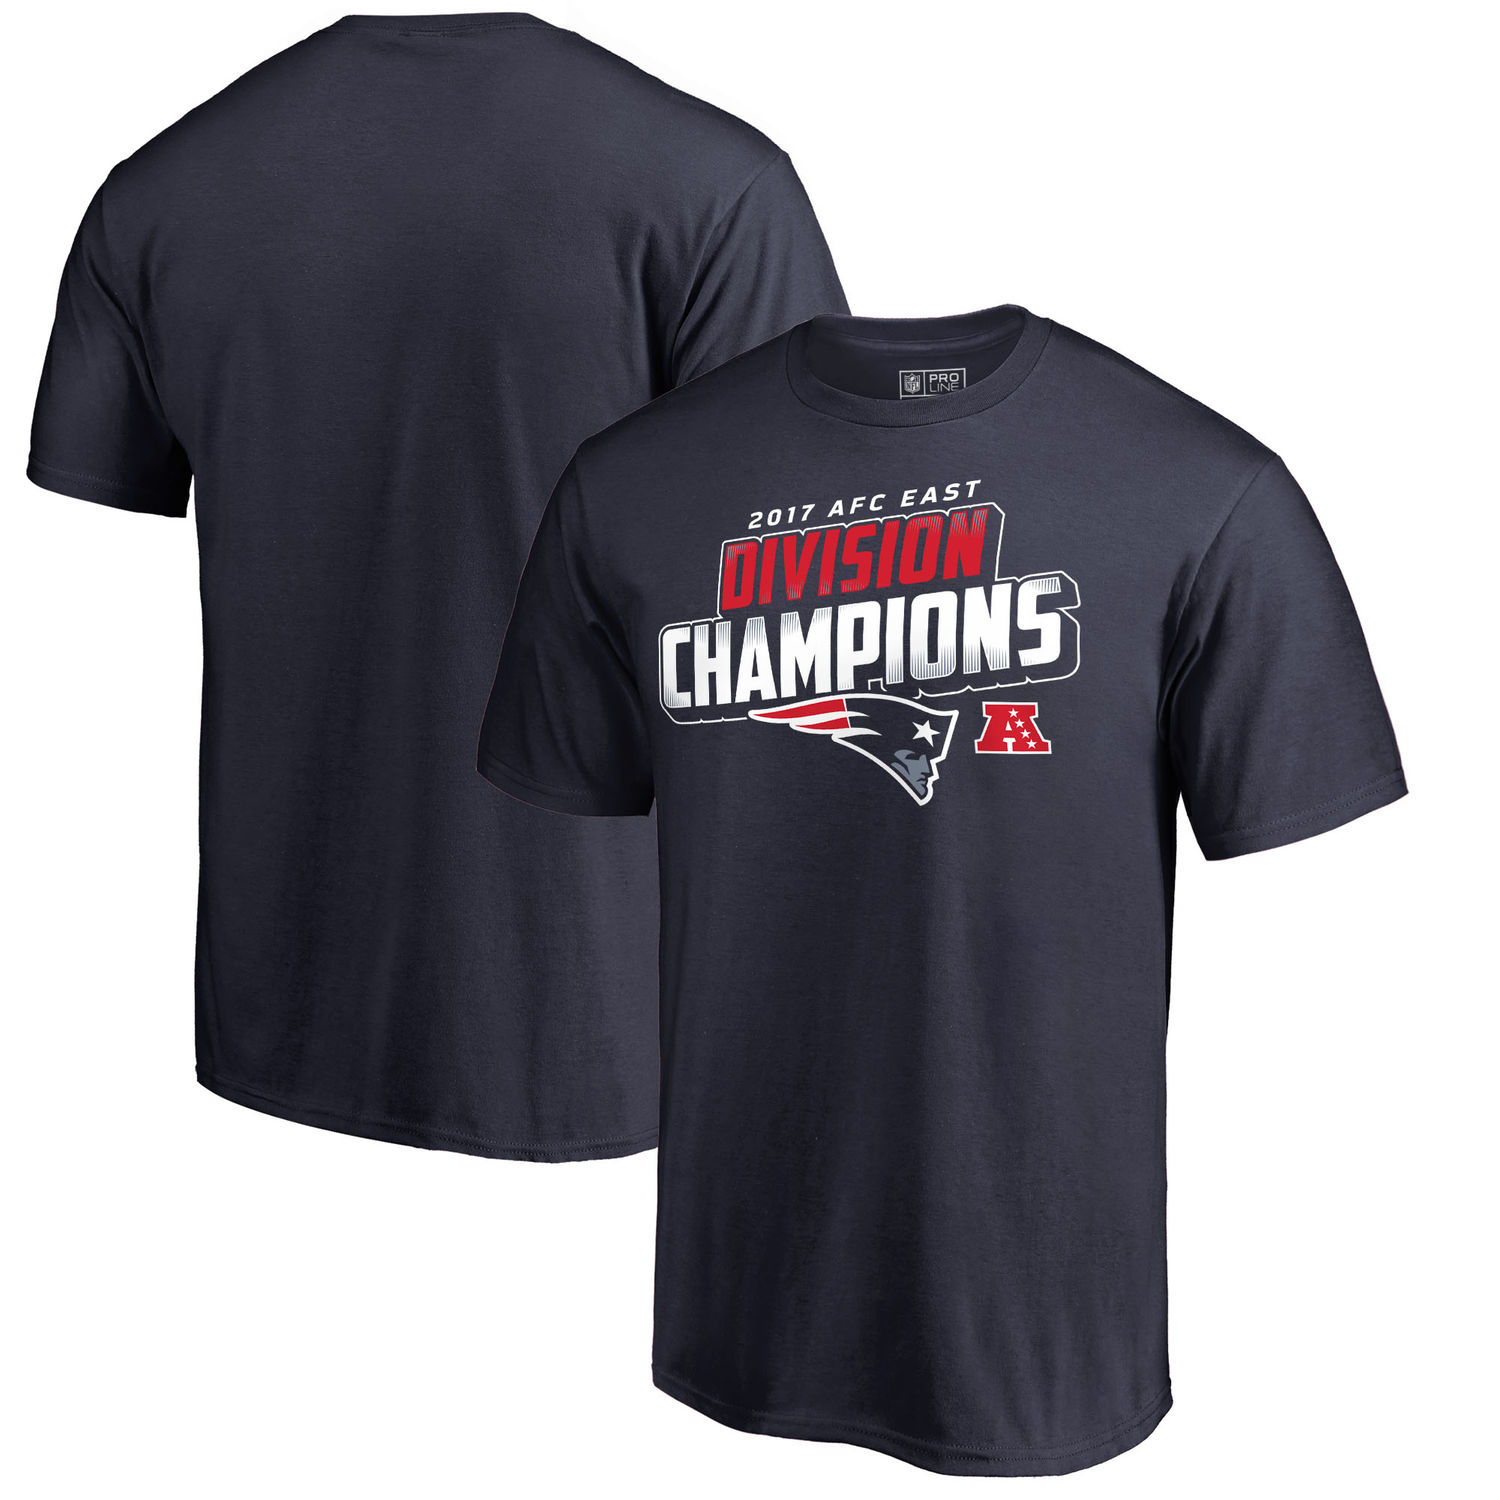 Men's New England Patriots NFL Pro Line by Fanatics Branded Navy 2017 AFC East Division Champions T Shirt